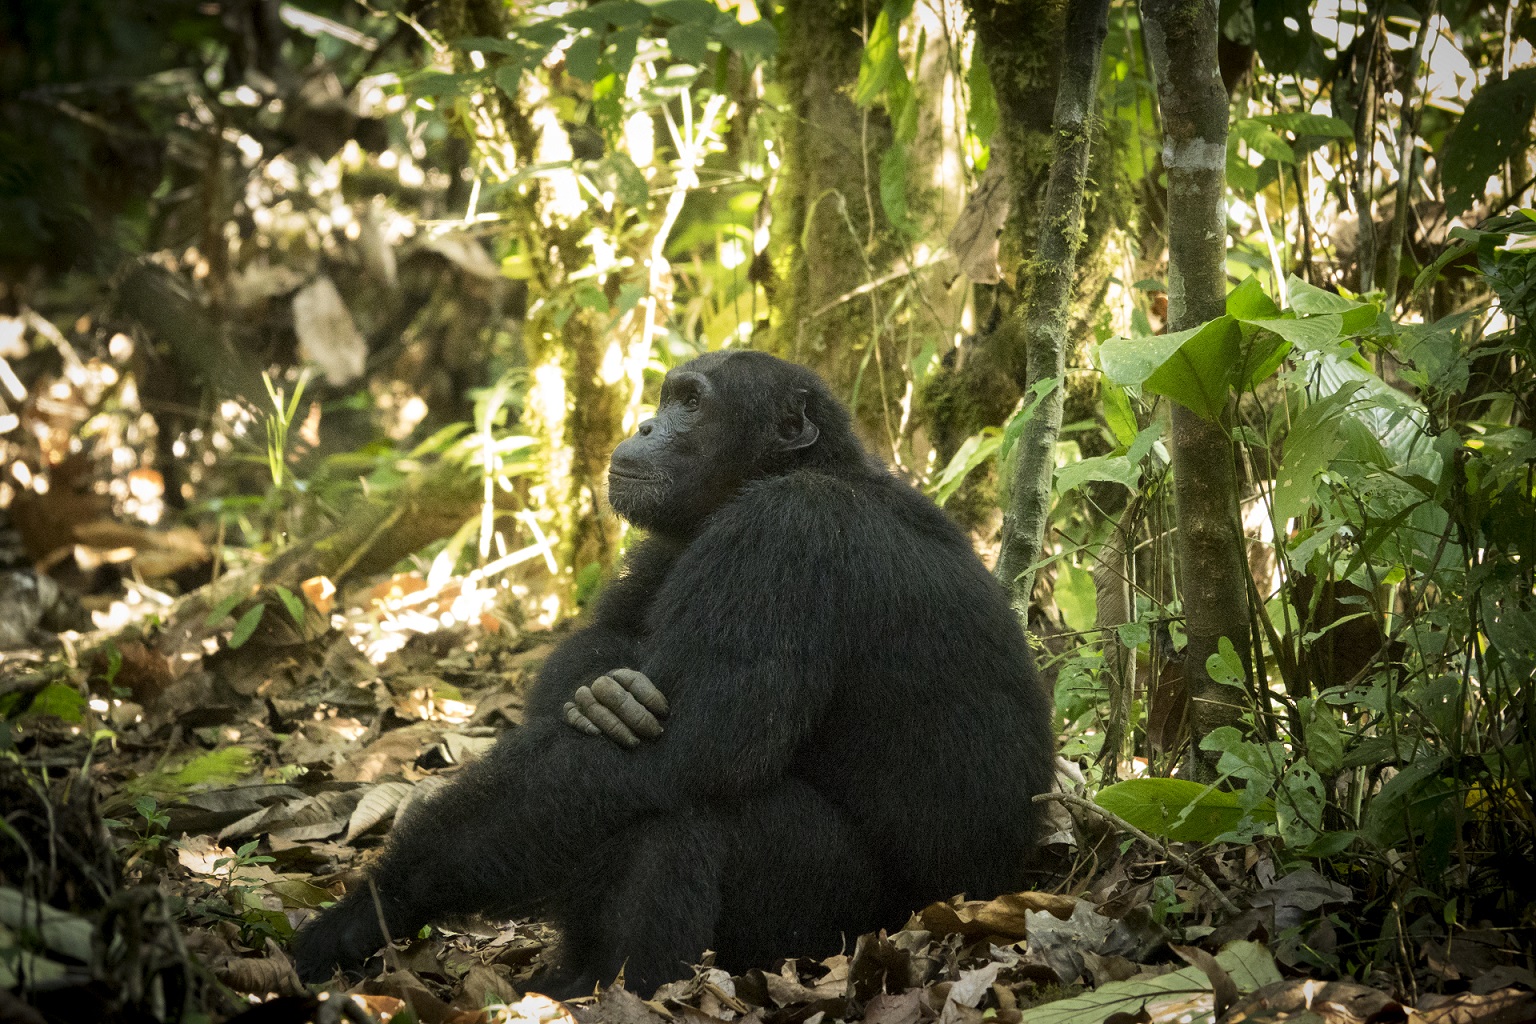 Chimp in the budongo forest Uganda named Sonso

IMAGE: JP 2017